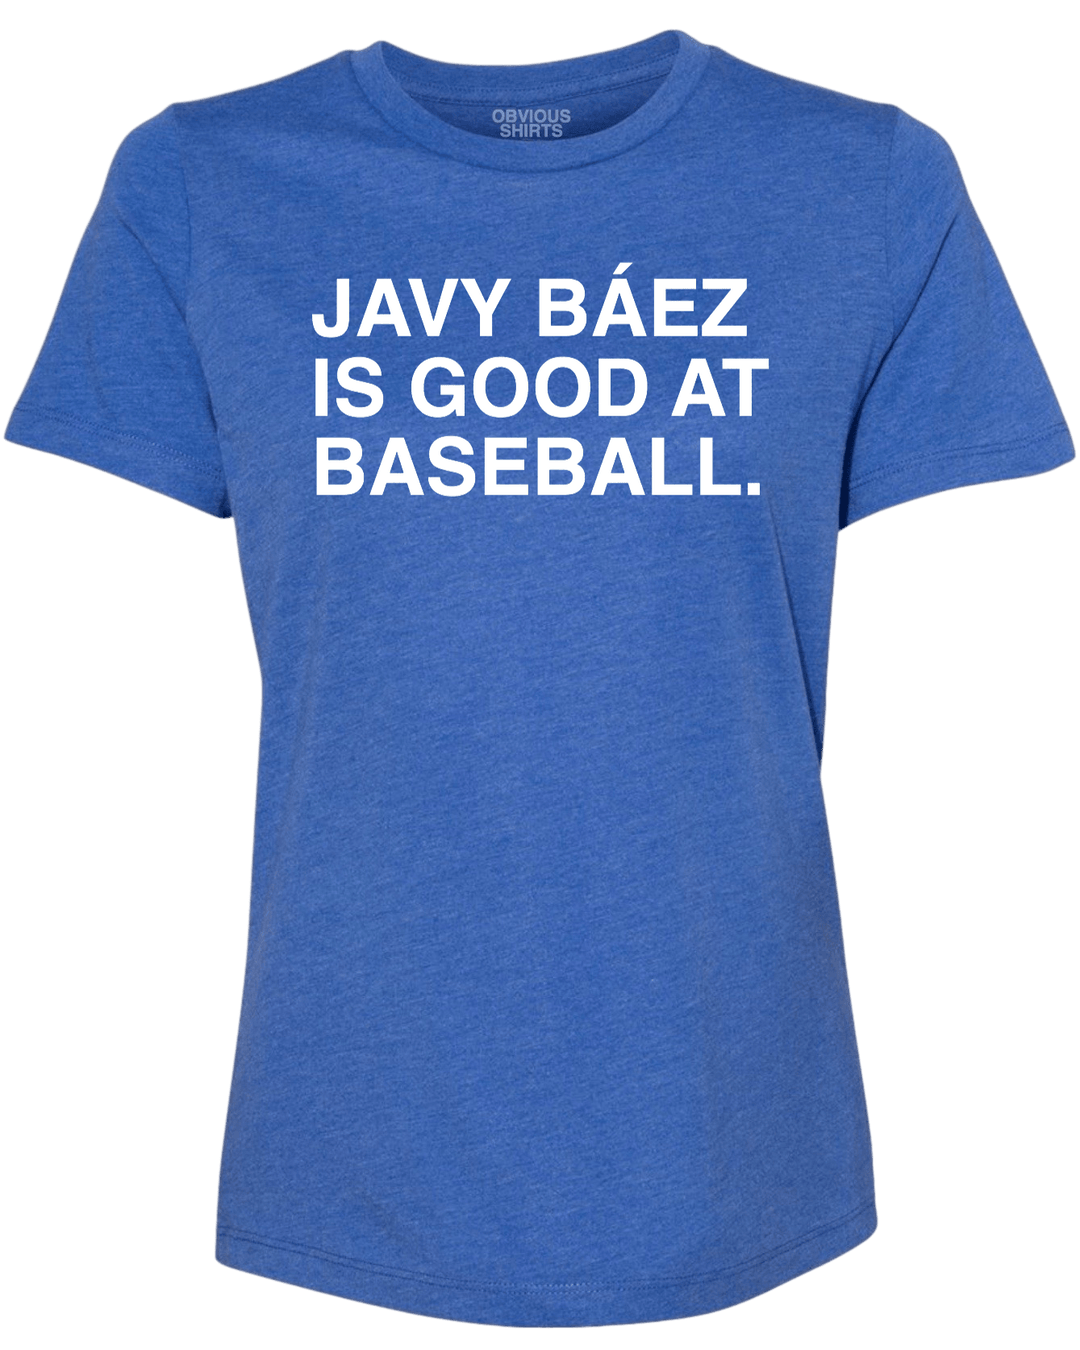 JAVY BAEZ IS GOOD AT BASEBALL. (WOMEN'S CREW) - OBVIOUS SHIRTS.